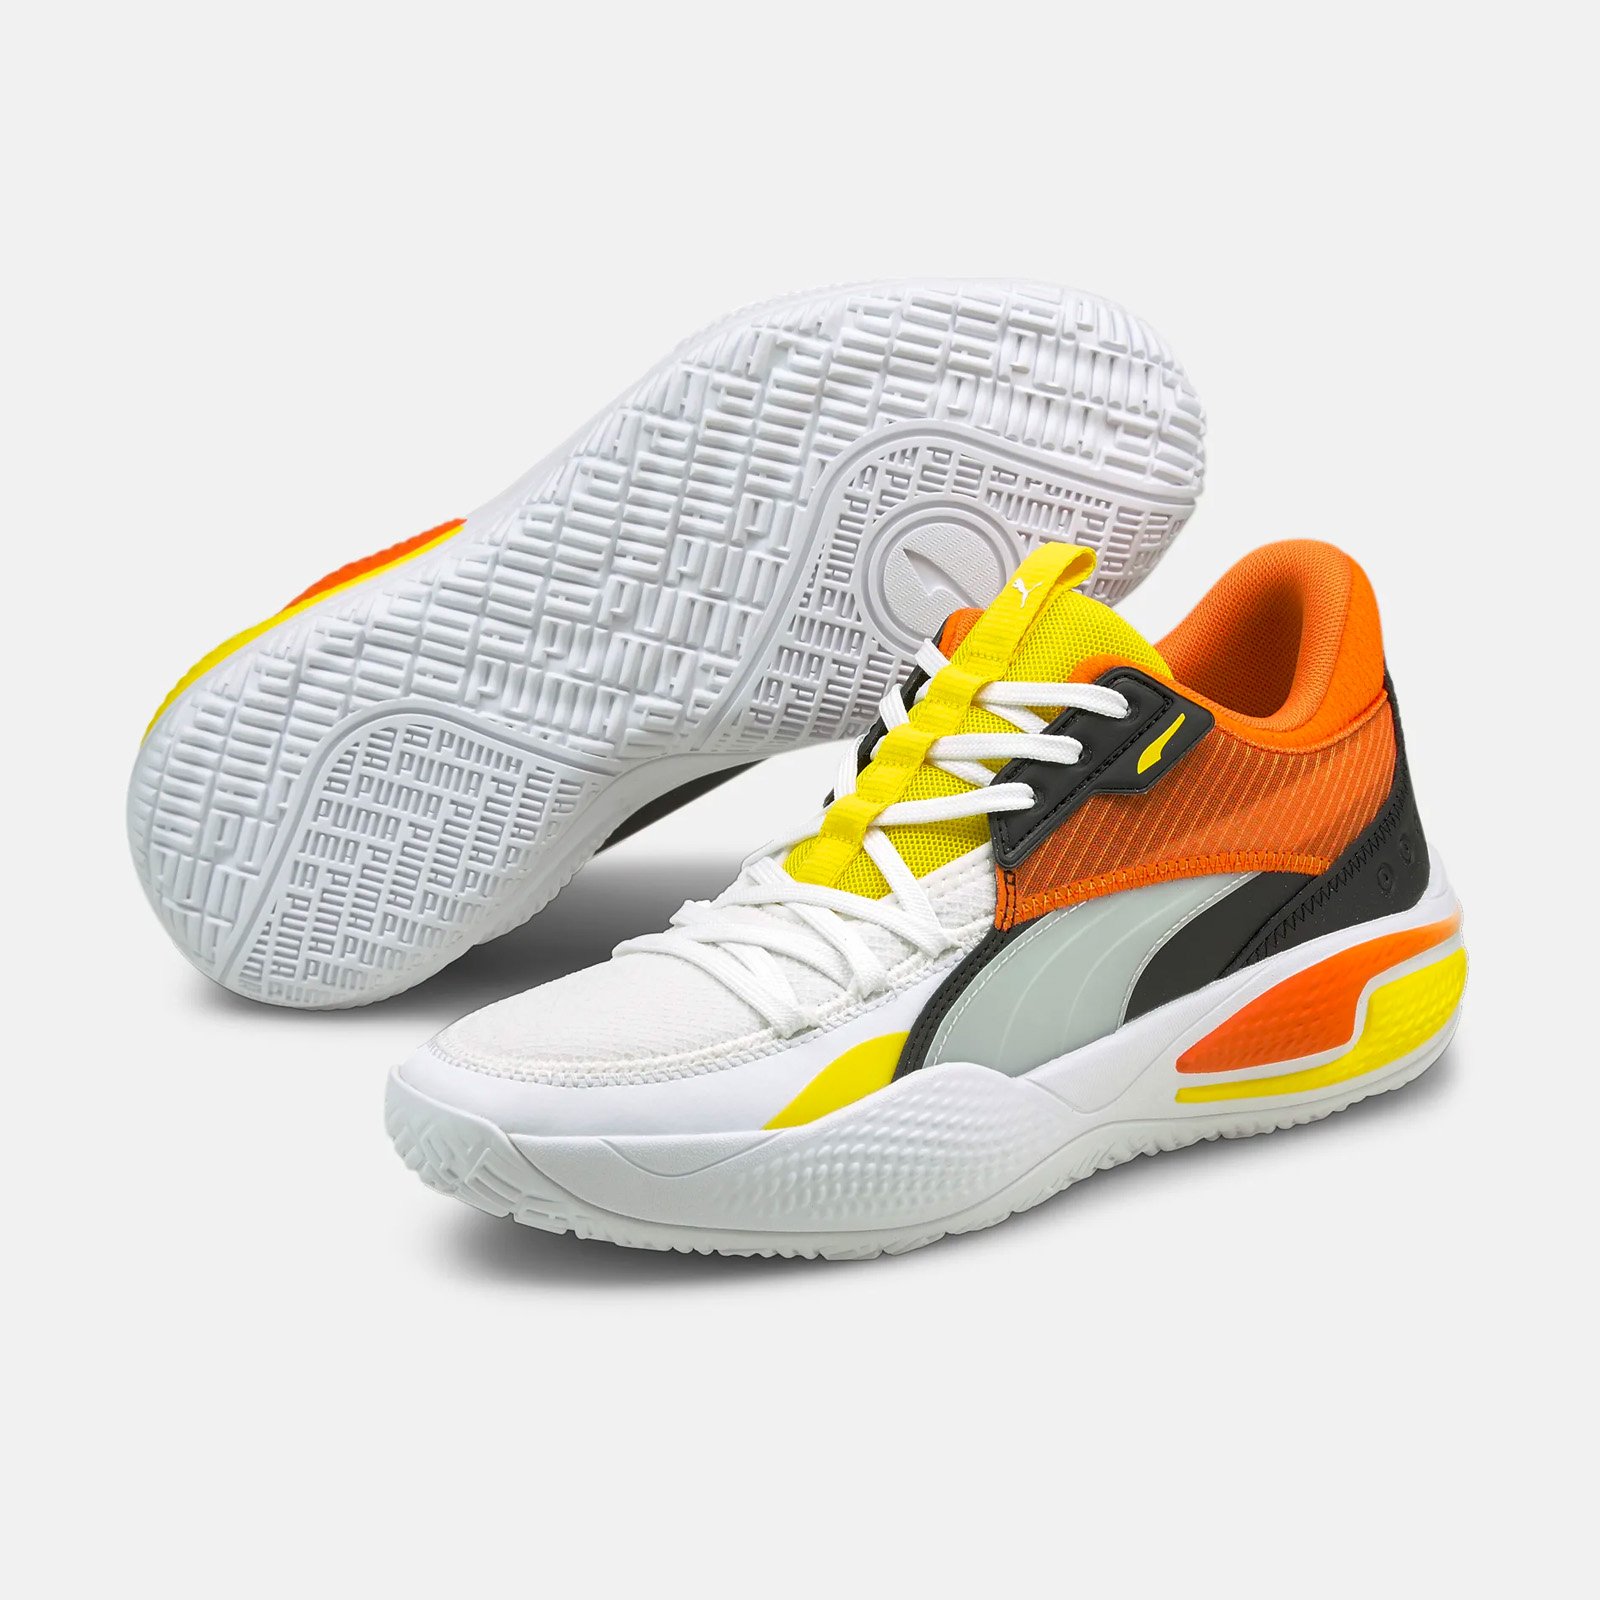 puma-court-rider-59th-street-376124-01-where-to-buy 3 - Foot Fire